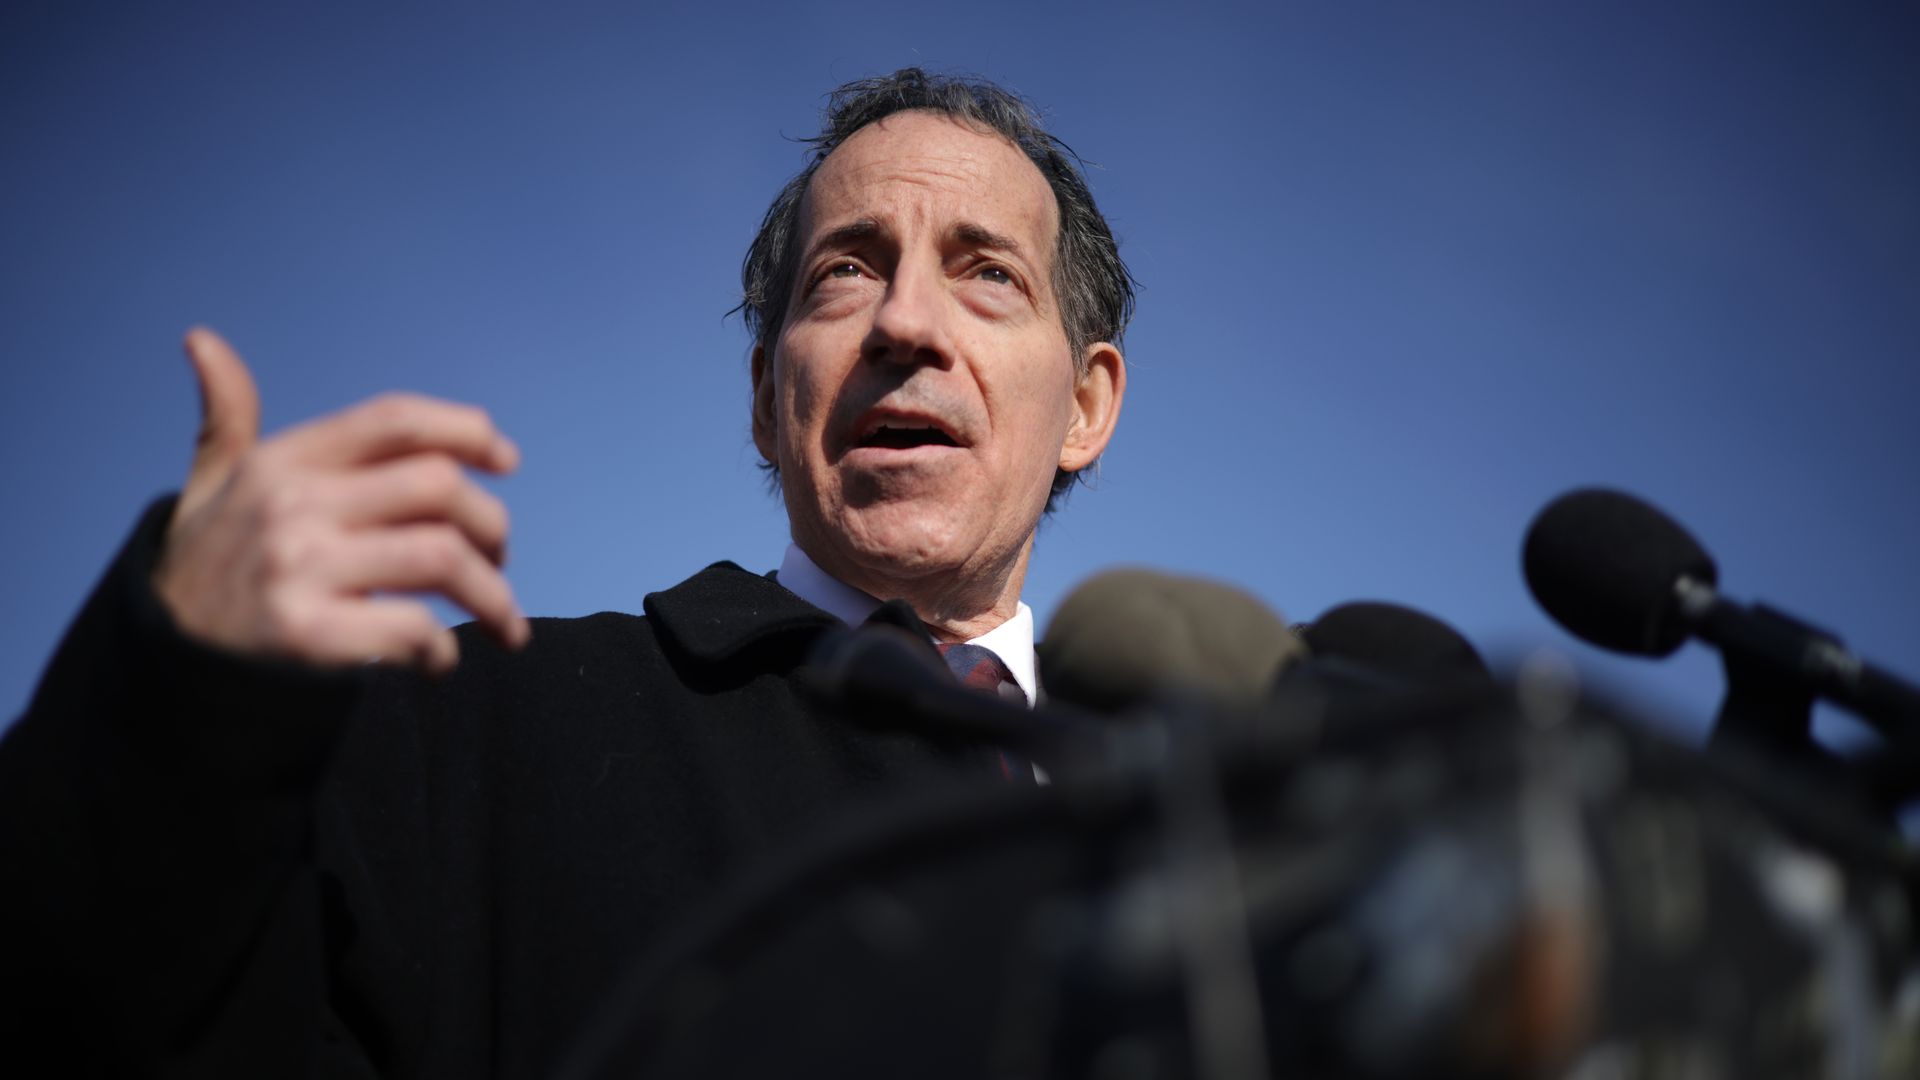 ep. Jamie Raskin (D-MD) speaks during a news conference outside the U.S. Capitol on January 5, 2024 in Washington, DC. Democrats held a news conference to mark the 3rd anniversary of the Jan 6 insurrection at the U.S. Capitol. (Photo by Alex Wong/Getty Images)